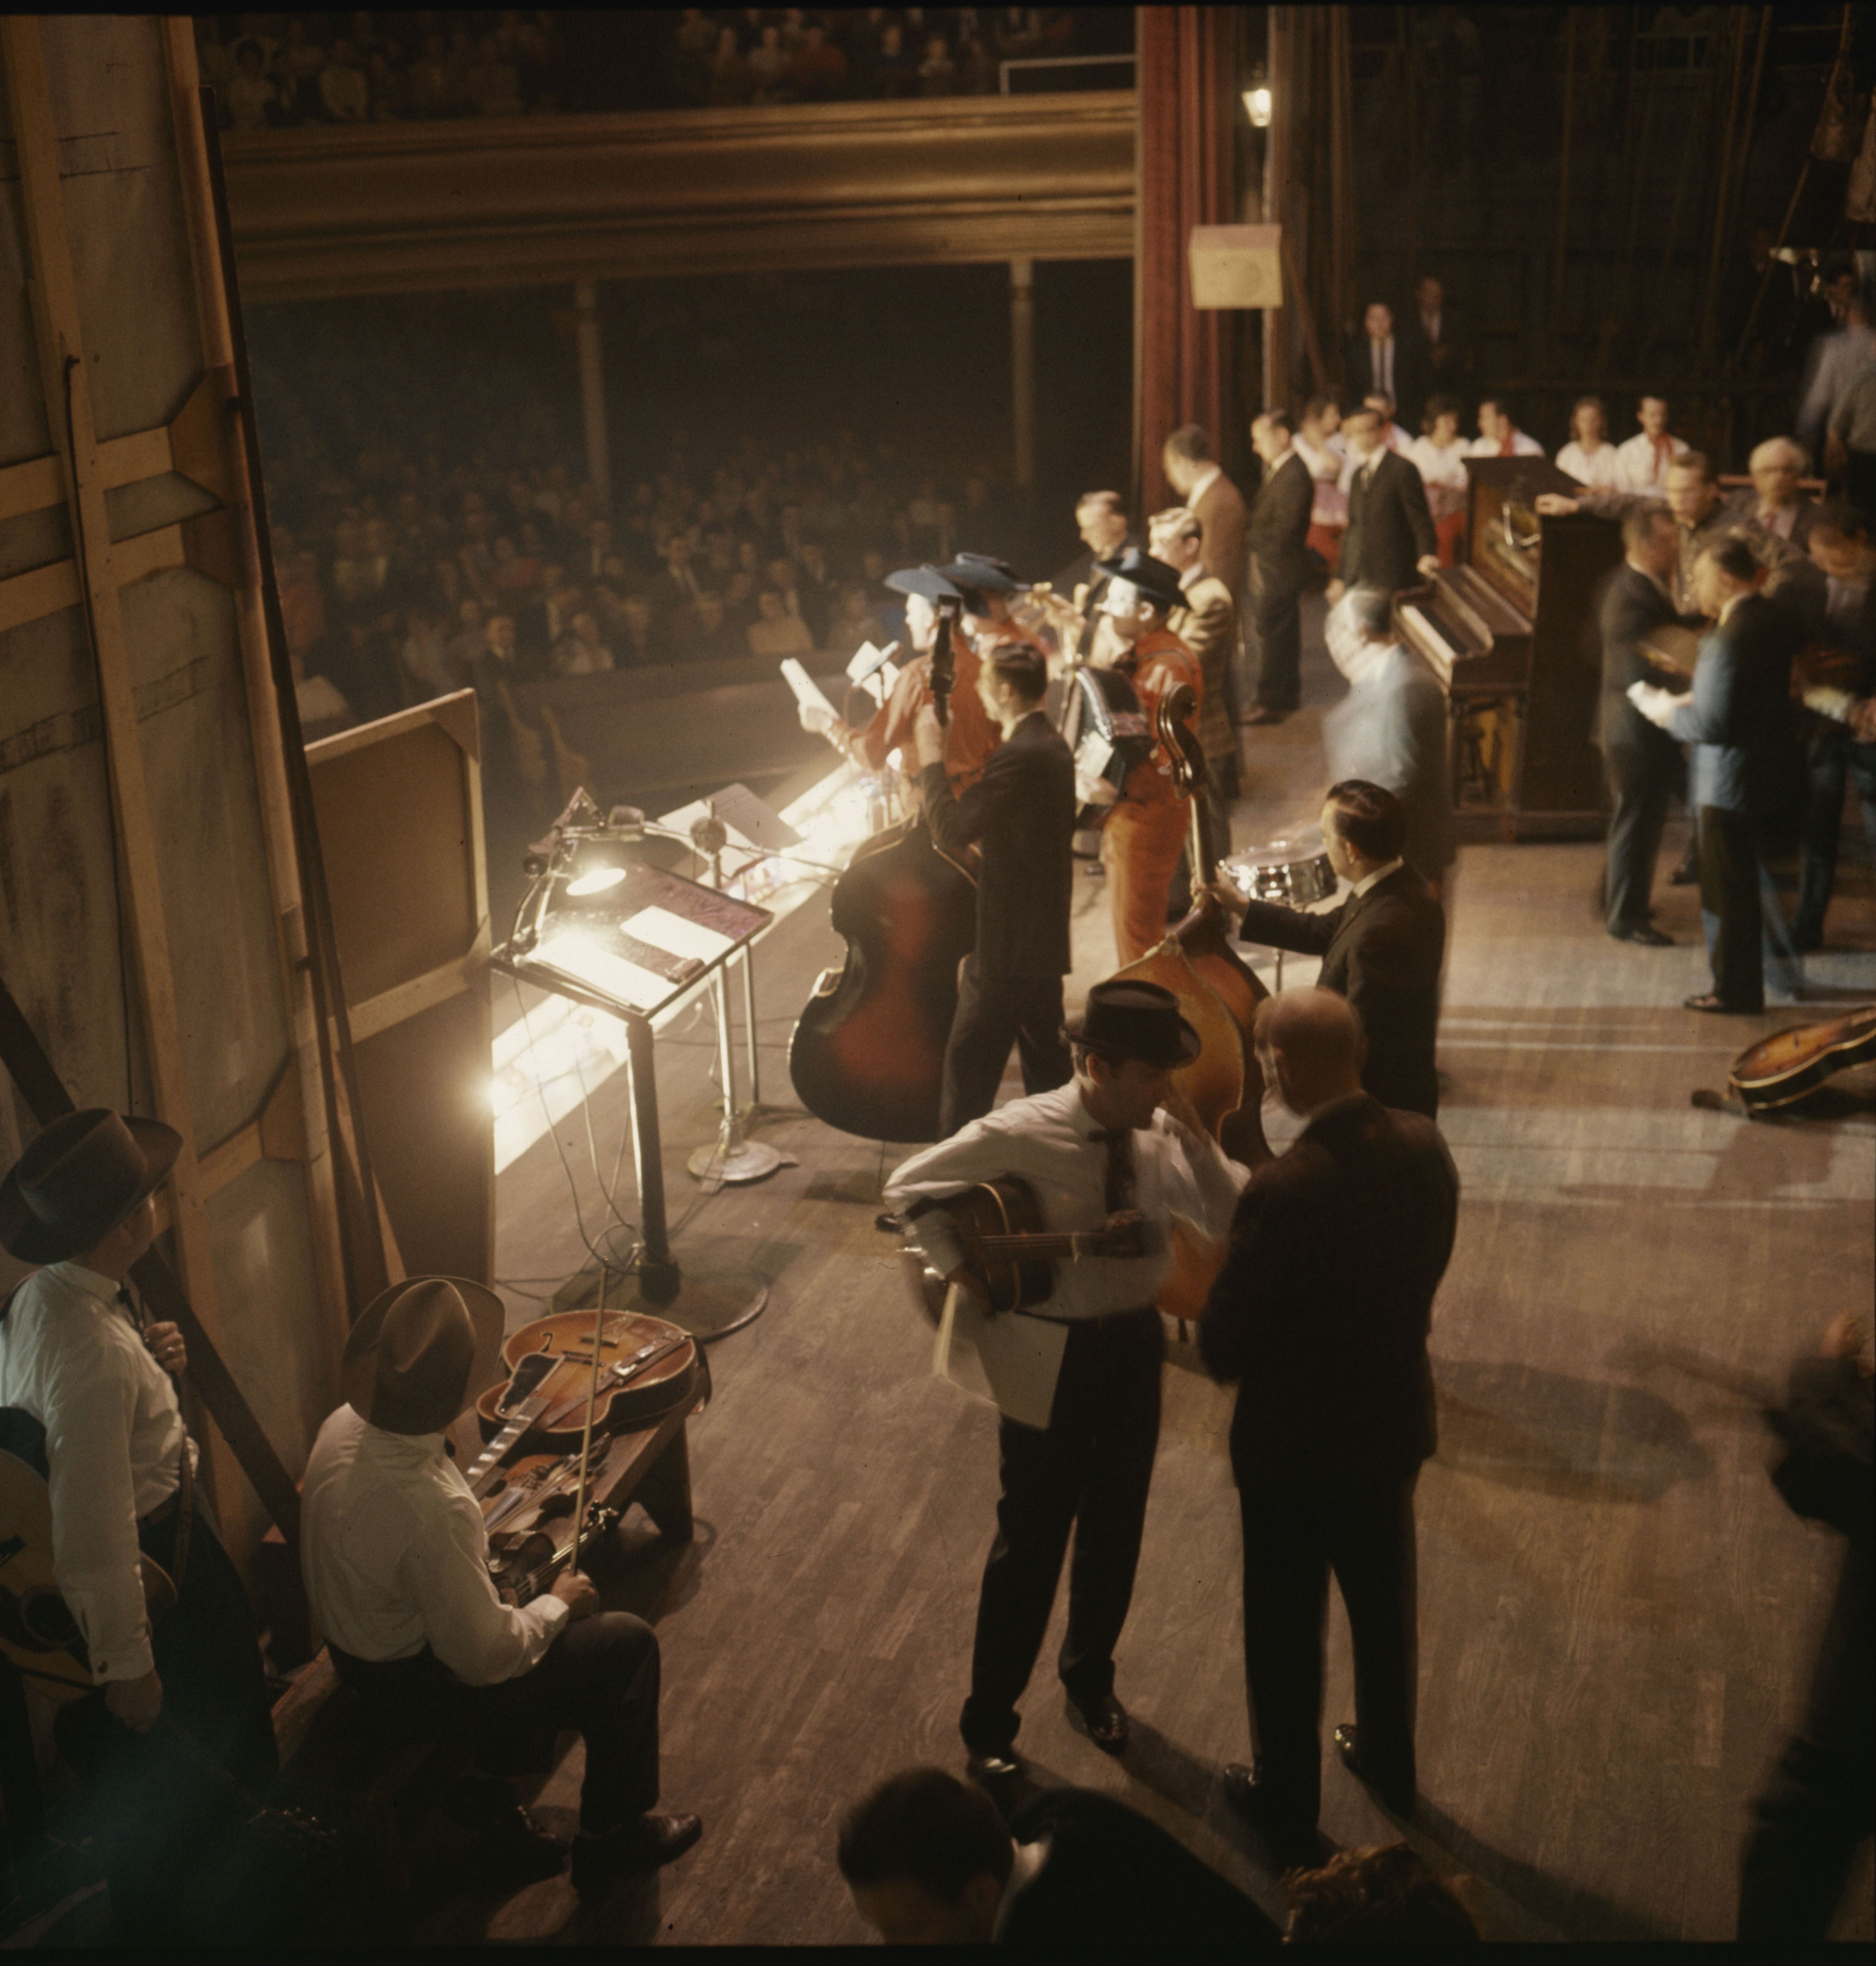 The Grand Ole Opry at the Ryman Auditorium, Nashville in 1960. (Photograph by Les Leverett)